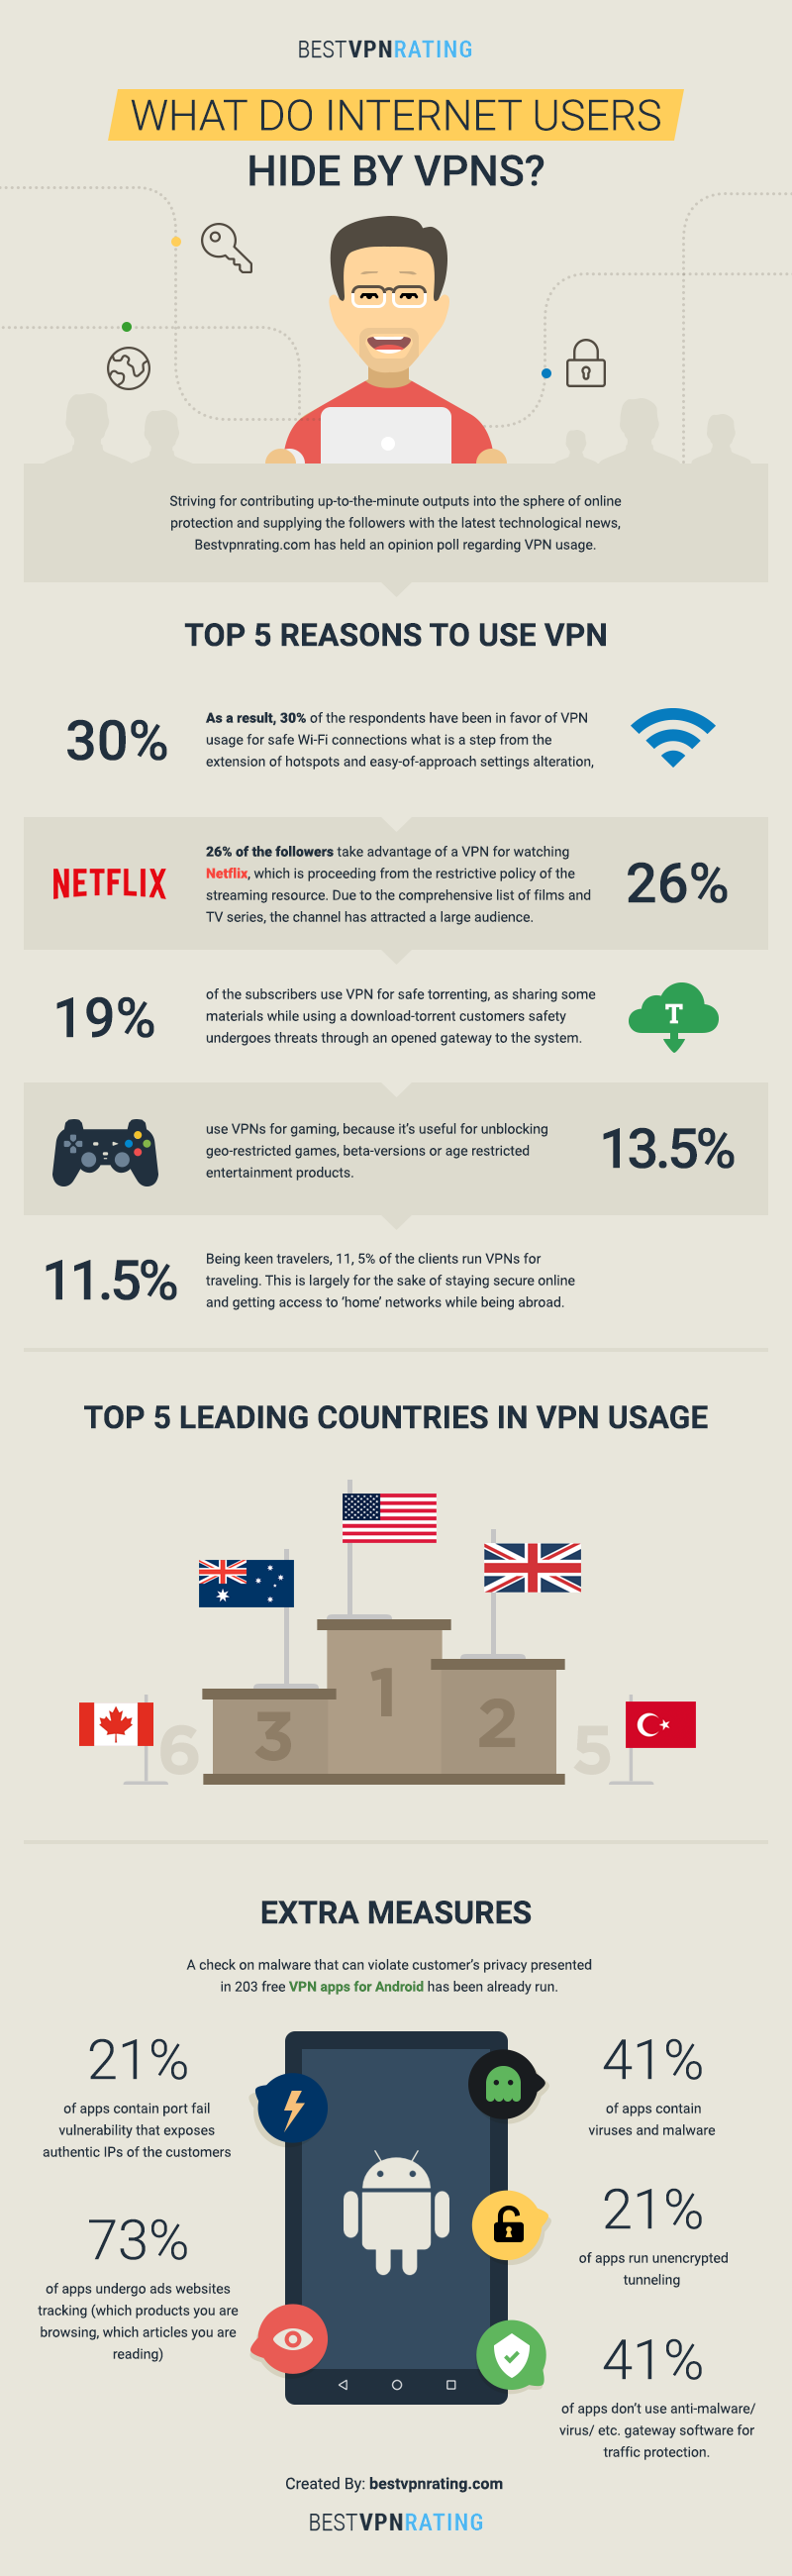 What Do Internet Users Hide By VPNs?